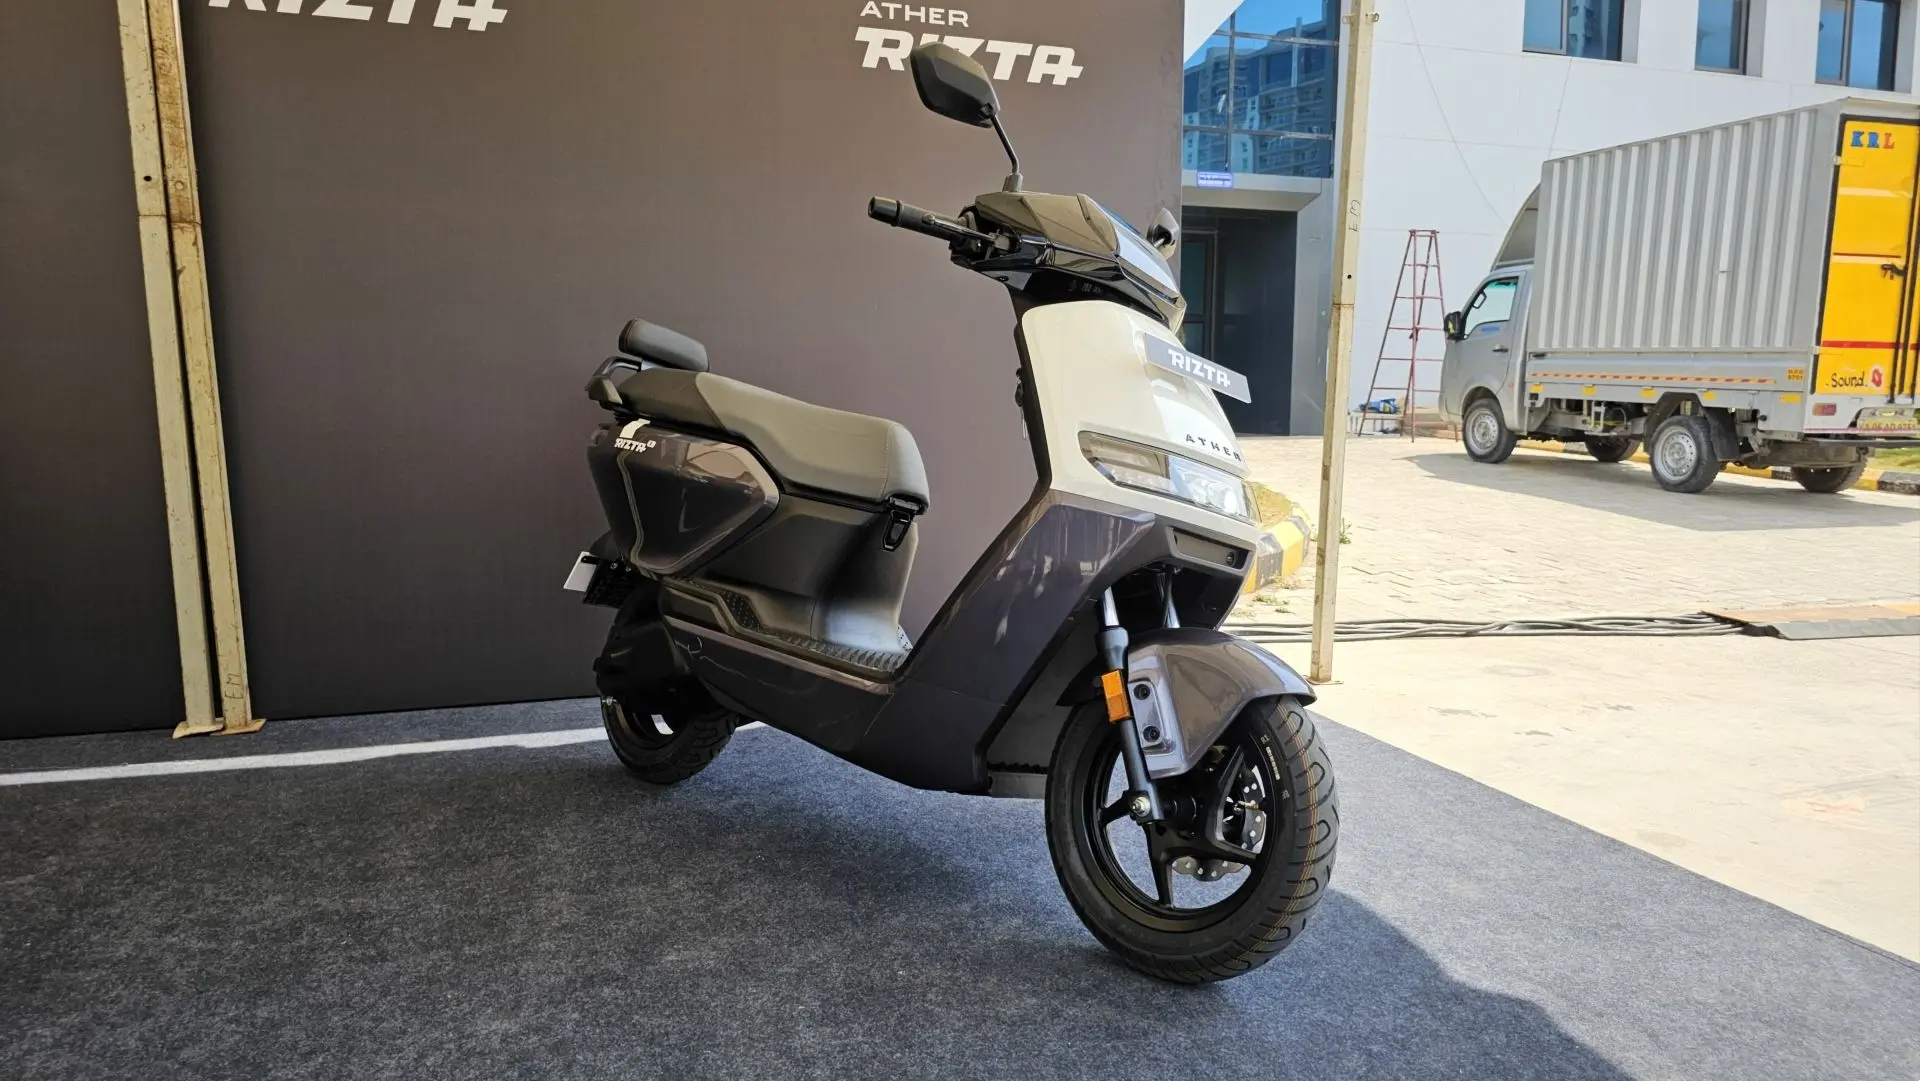 The Ather Rizta is Ather Energy’s second model line and is positioned as a family scooter promising more practicality and prices begin at Rs. 97,546 (Ex-showroom, Delhi), going up to Rs. 1.29 lakh (Ex-showroom, Delhi).